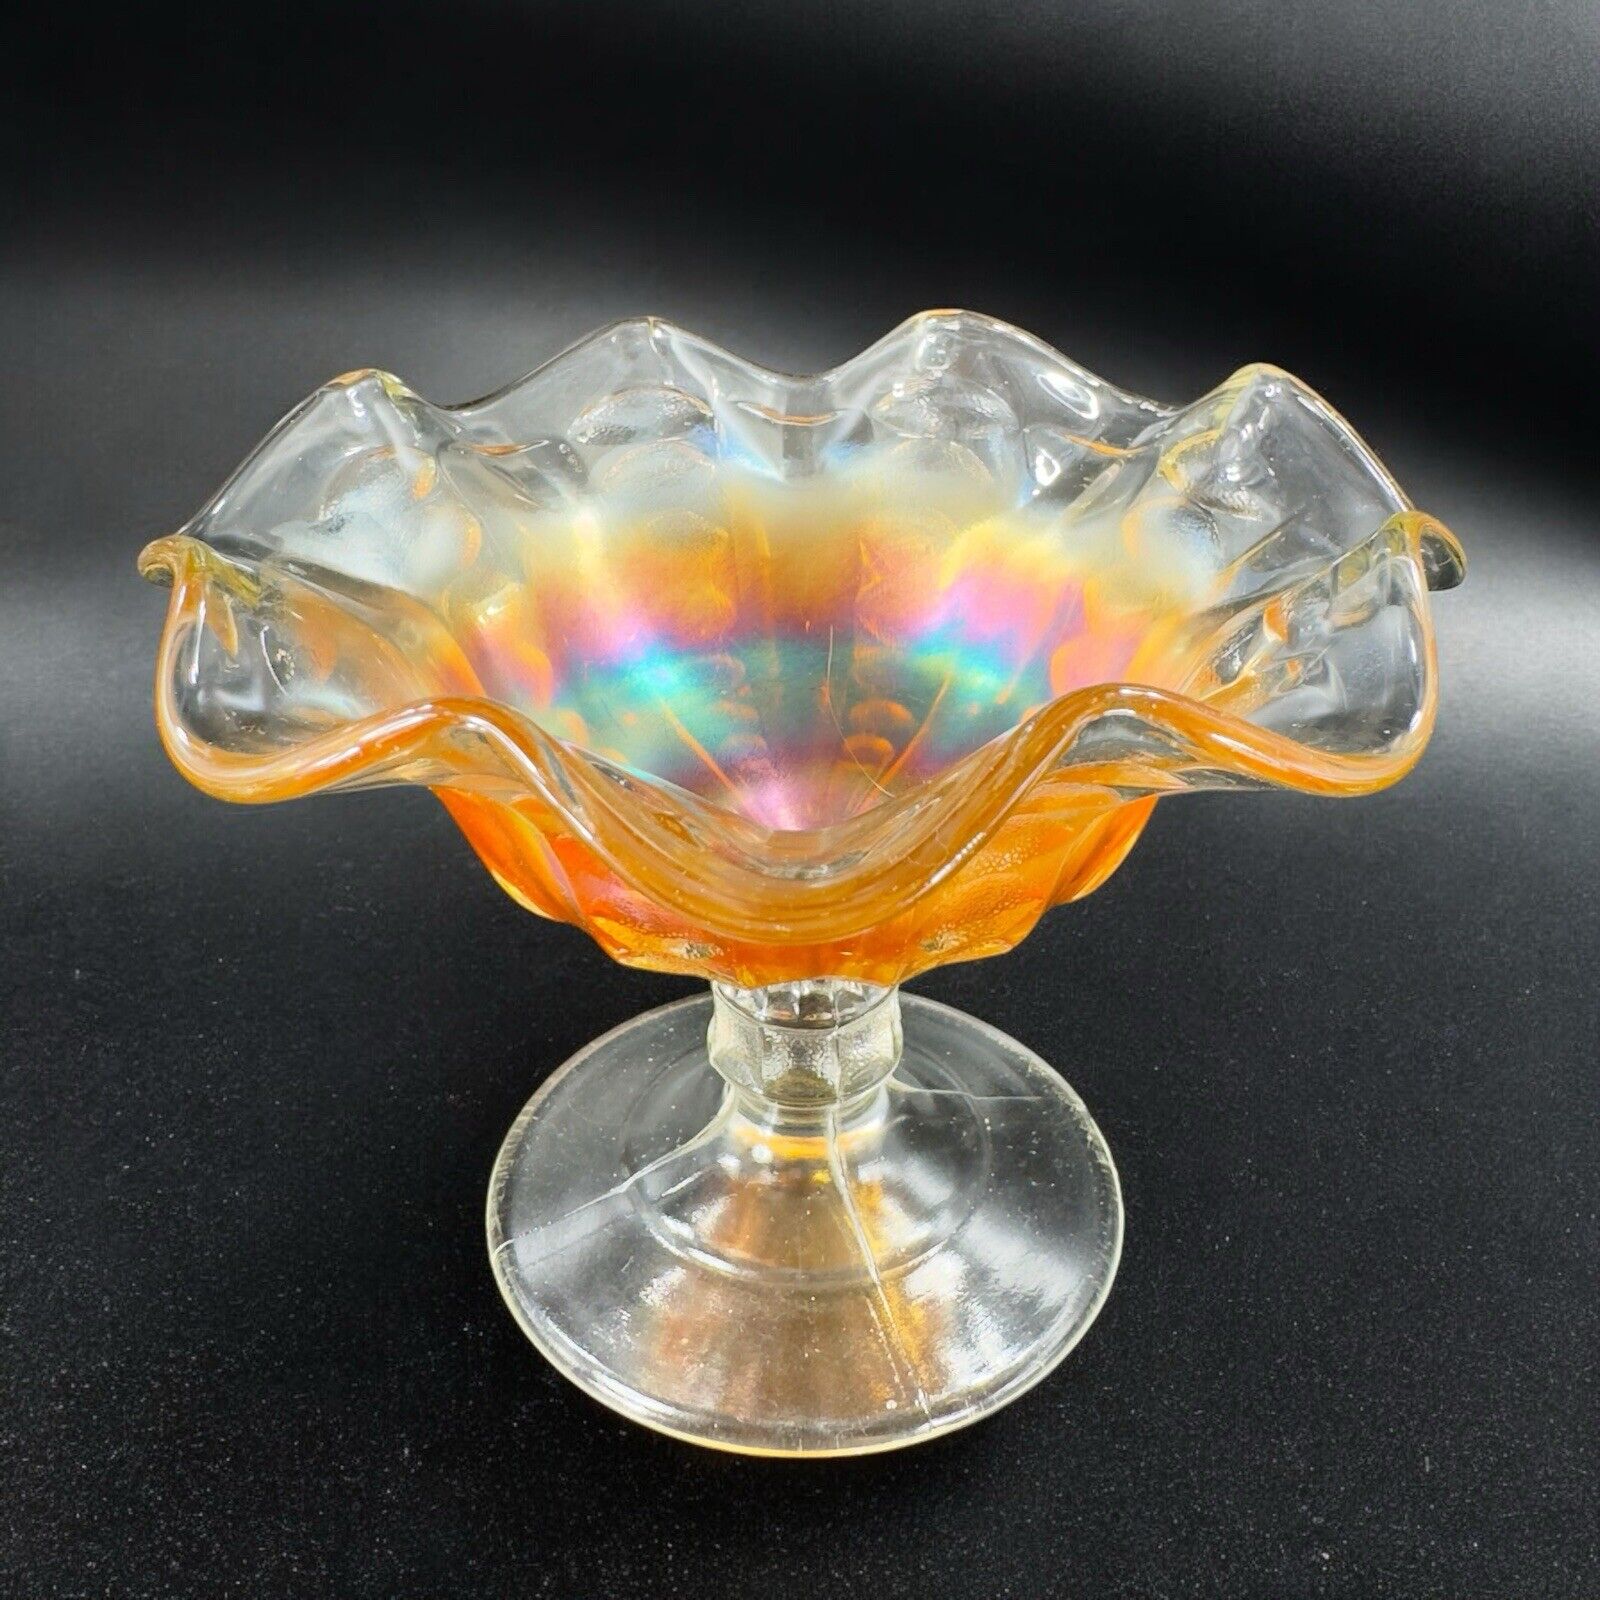 Vintage Carnival Glass Footed Dish Bowl Compote With Iridescent Center Marigold